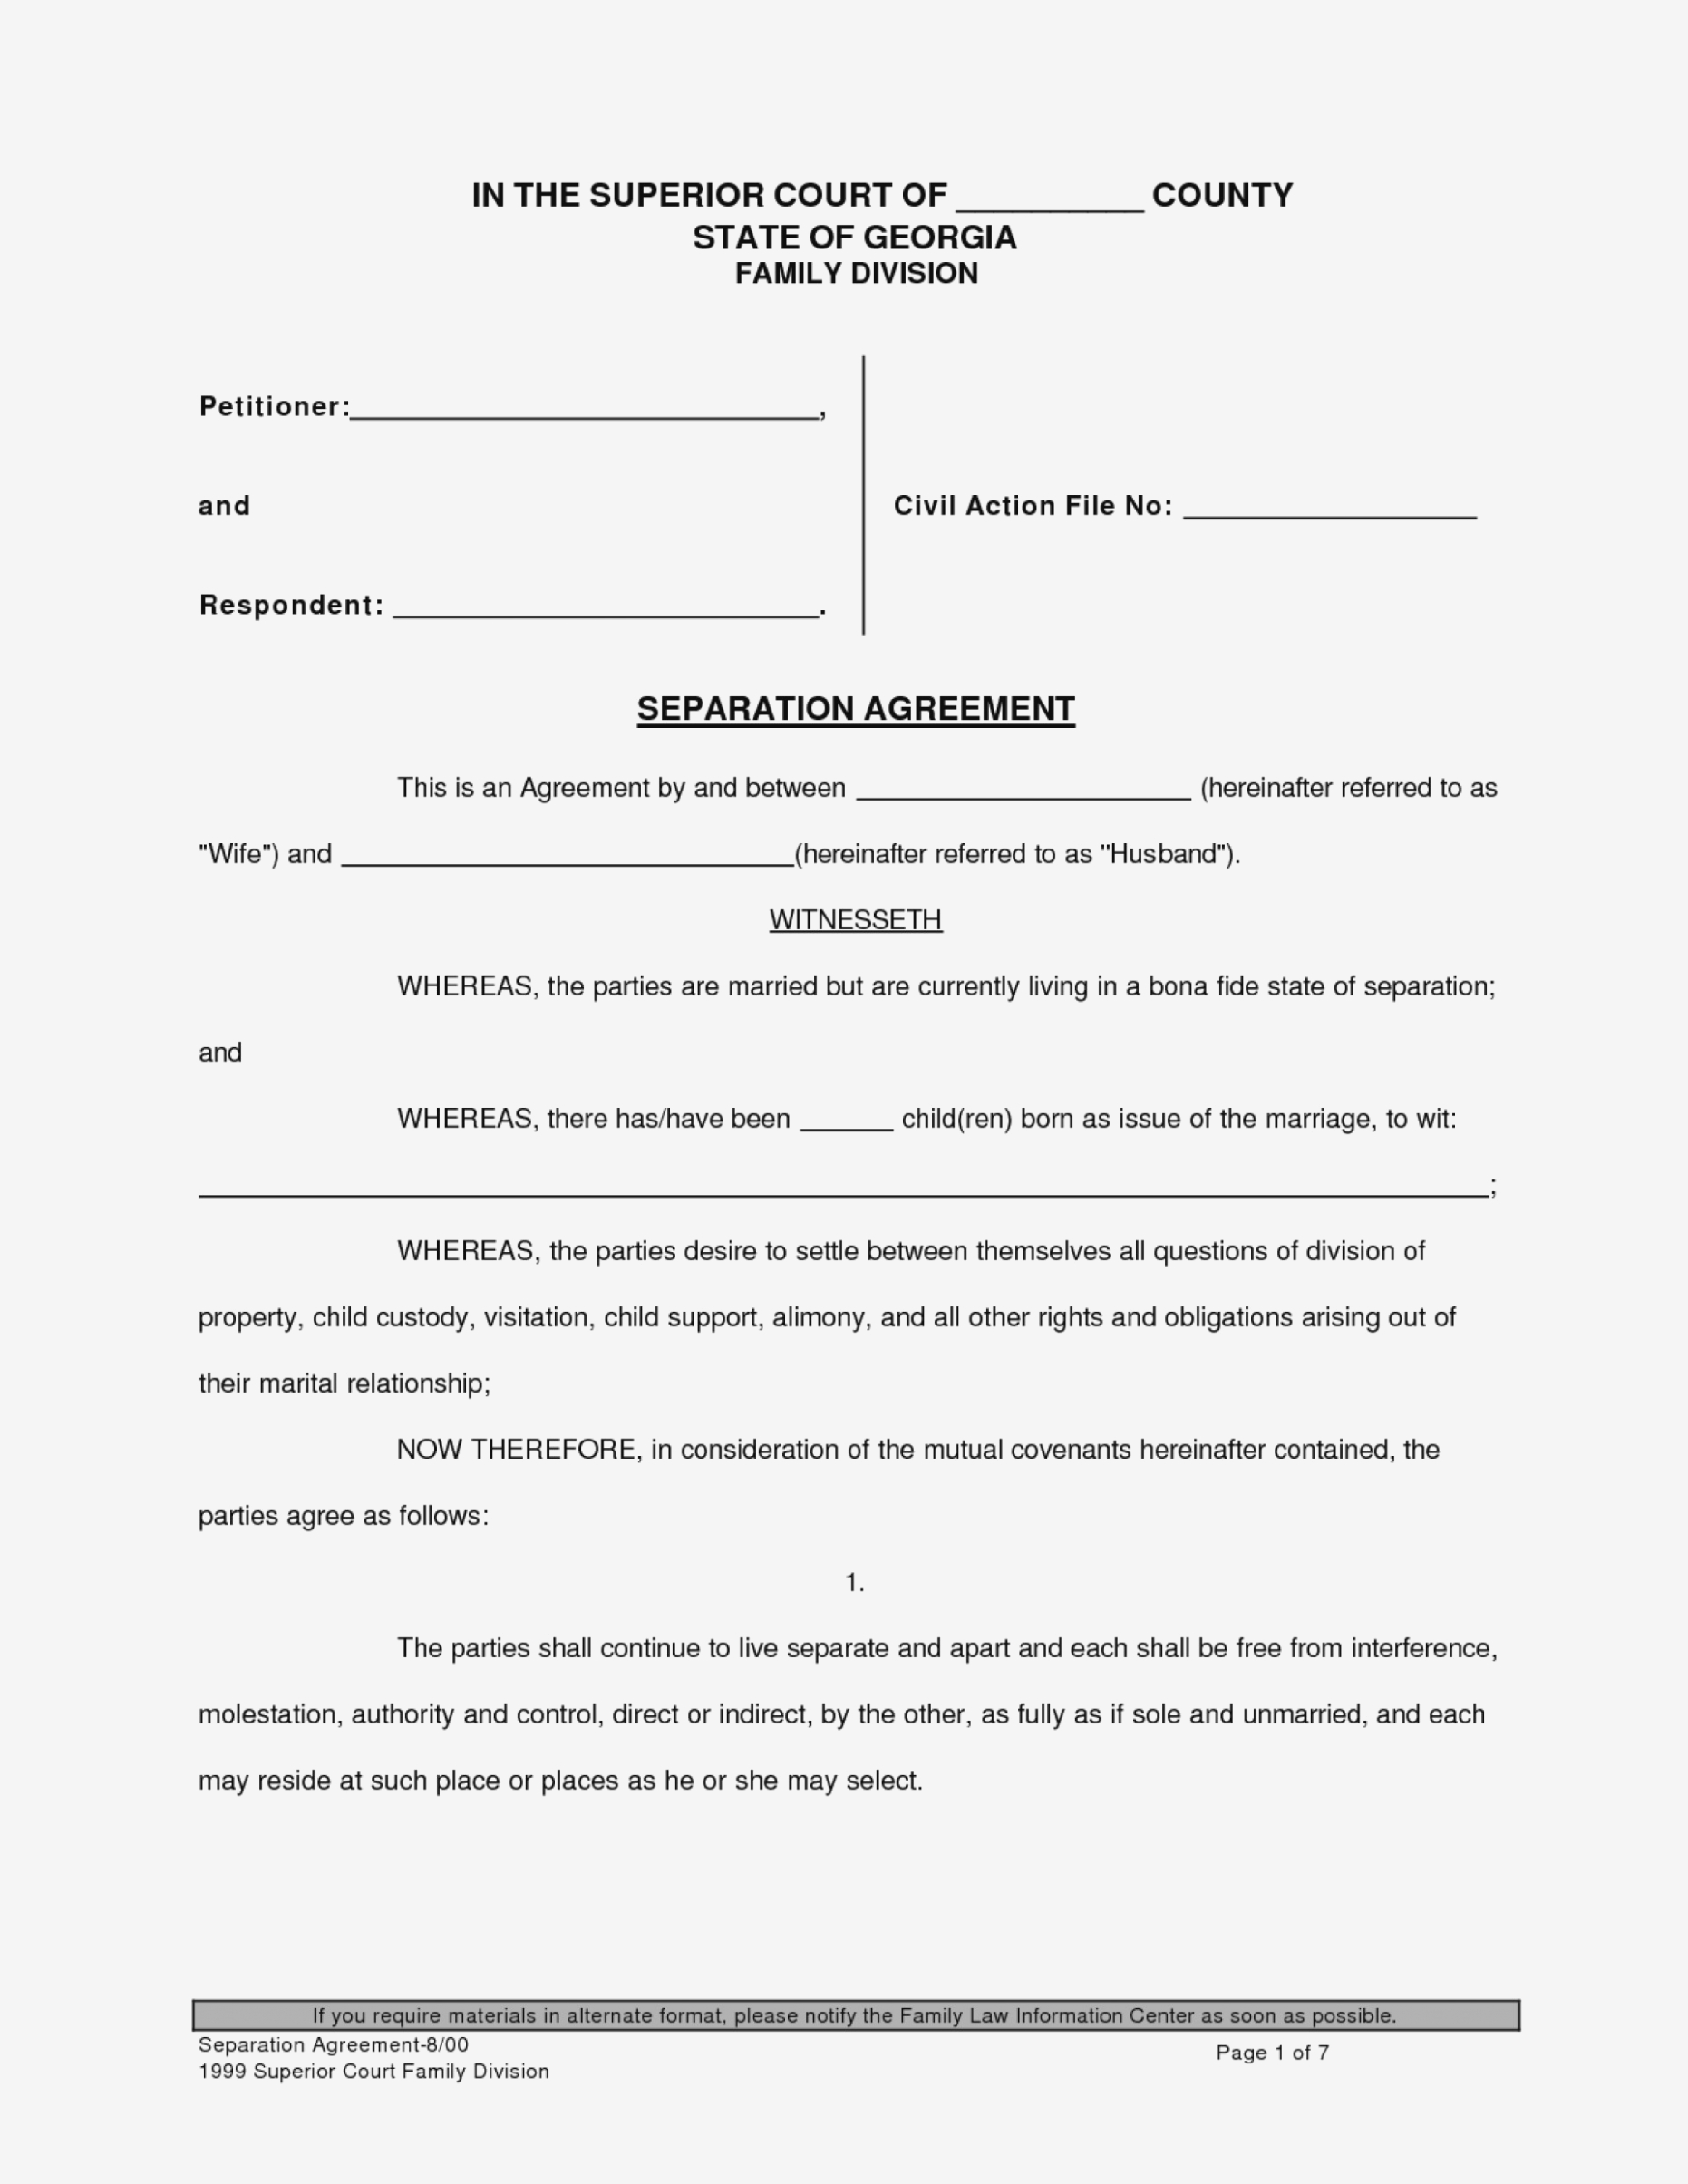 divorce papers online for free